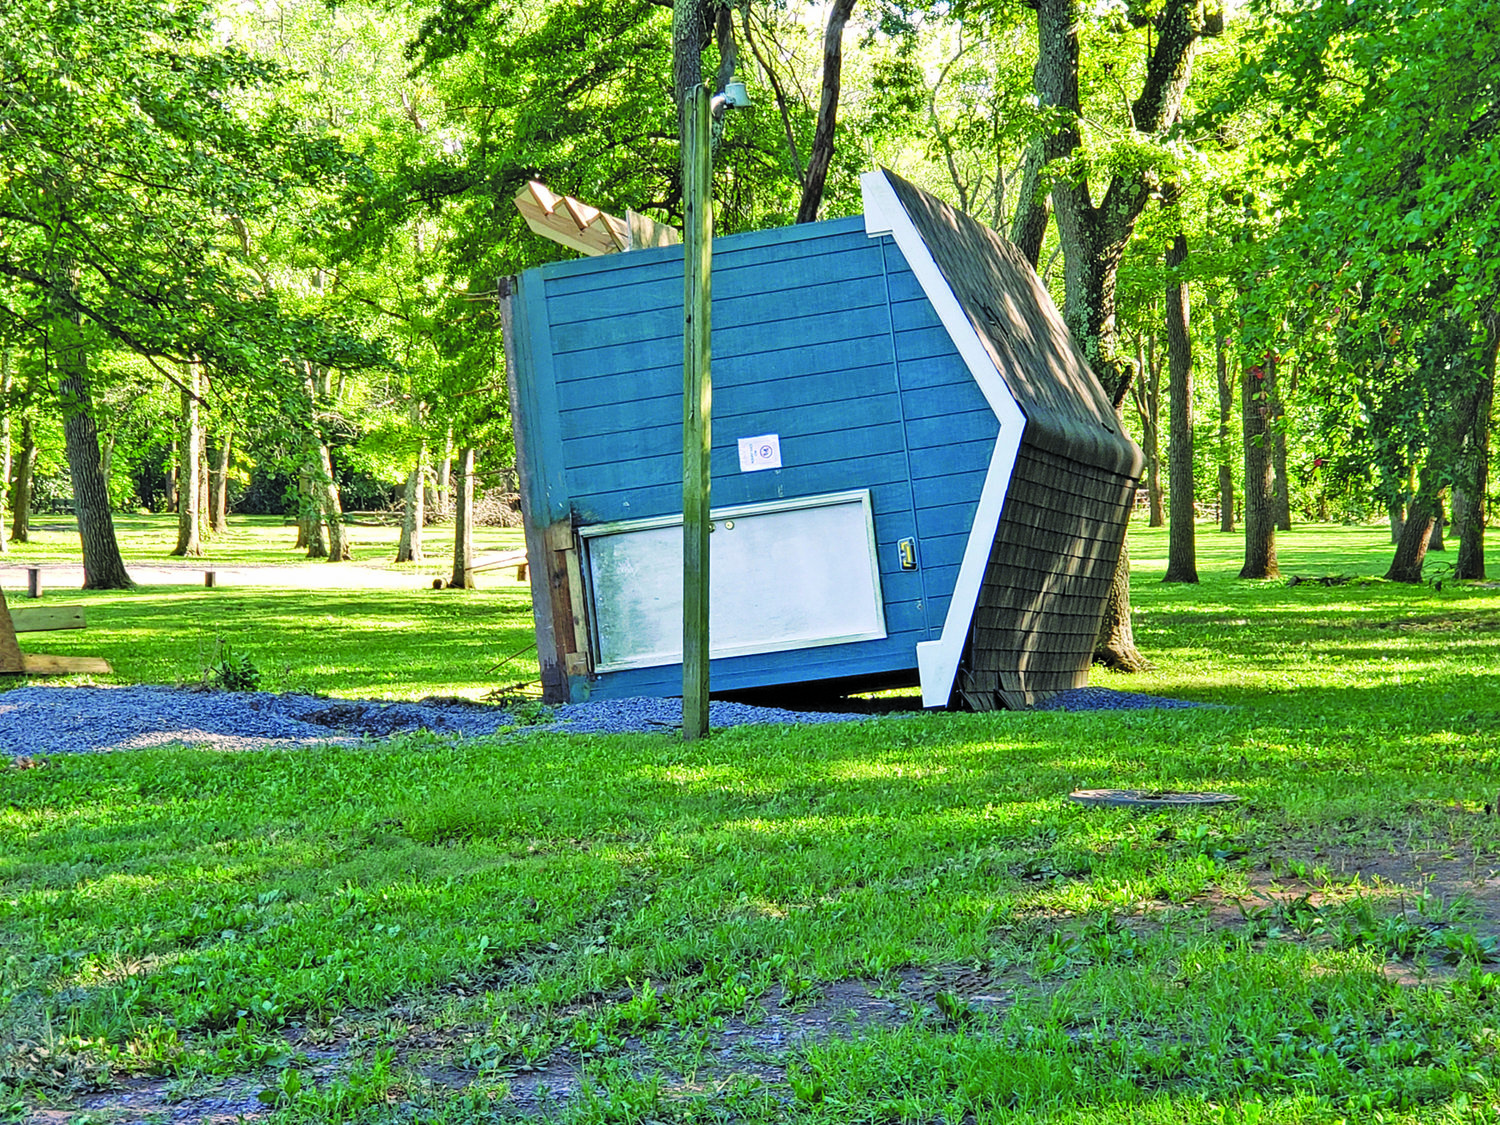 A shed tipped over at Lenape Park’s Minors Field, Perkasie.